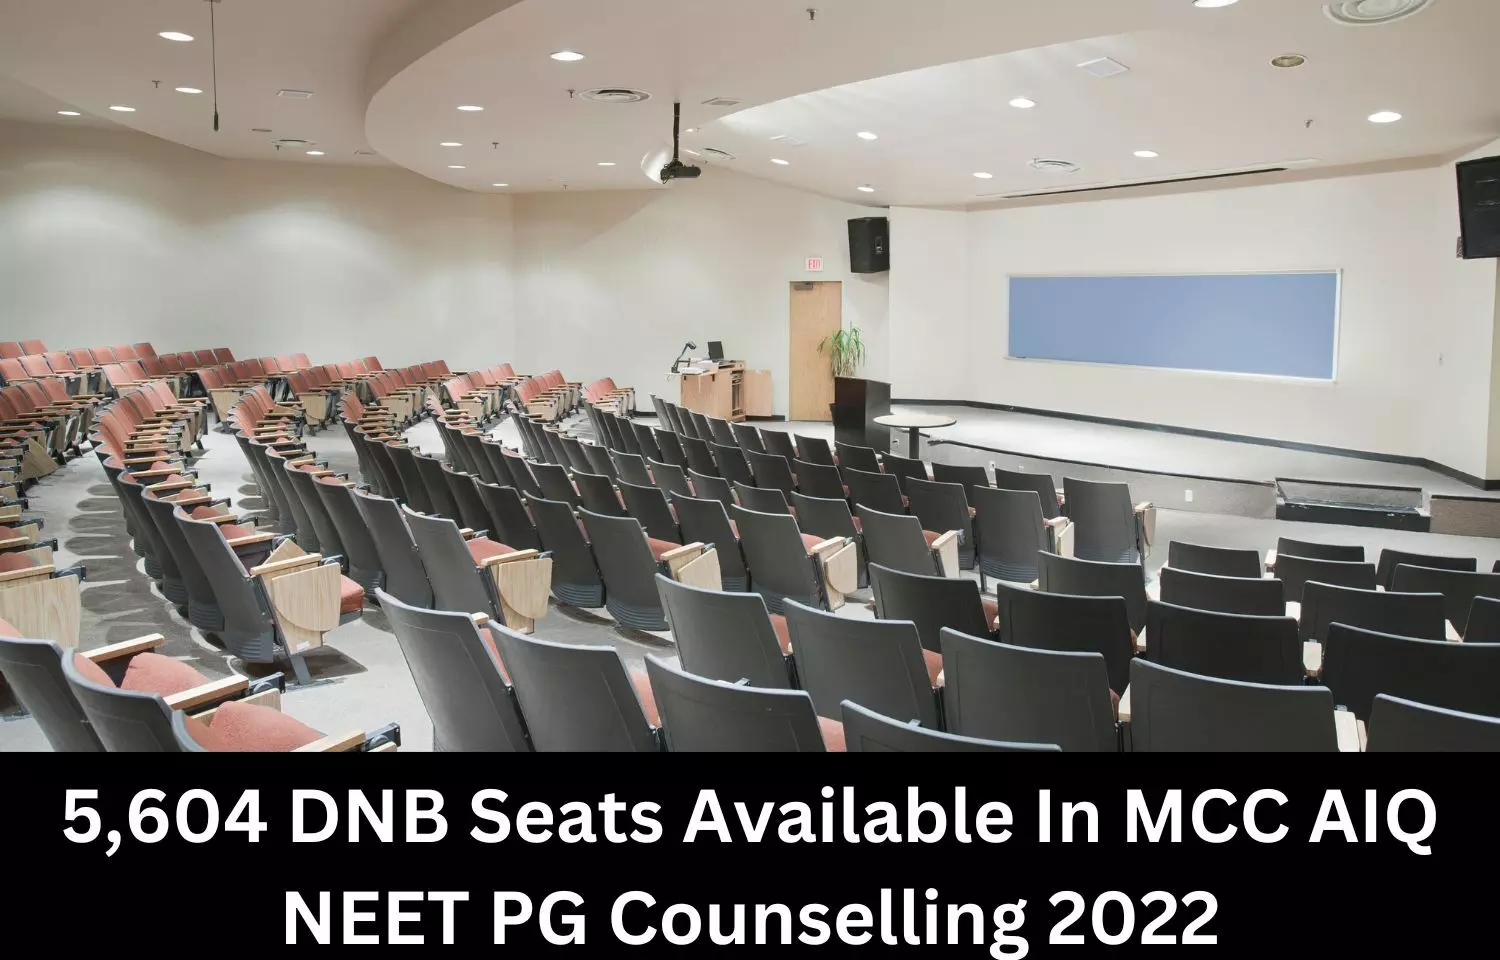 5,604 DNB seats available in MCC AIQ NEET PG counselling 2022, check out seat matrix